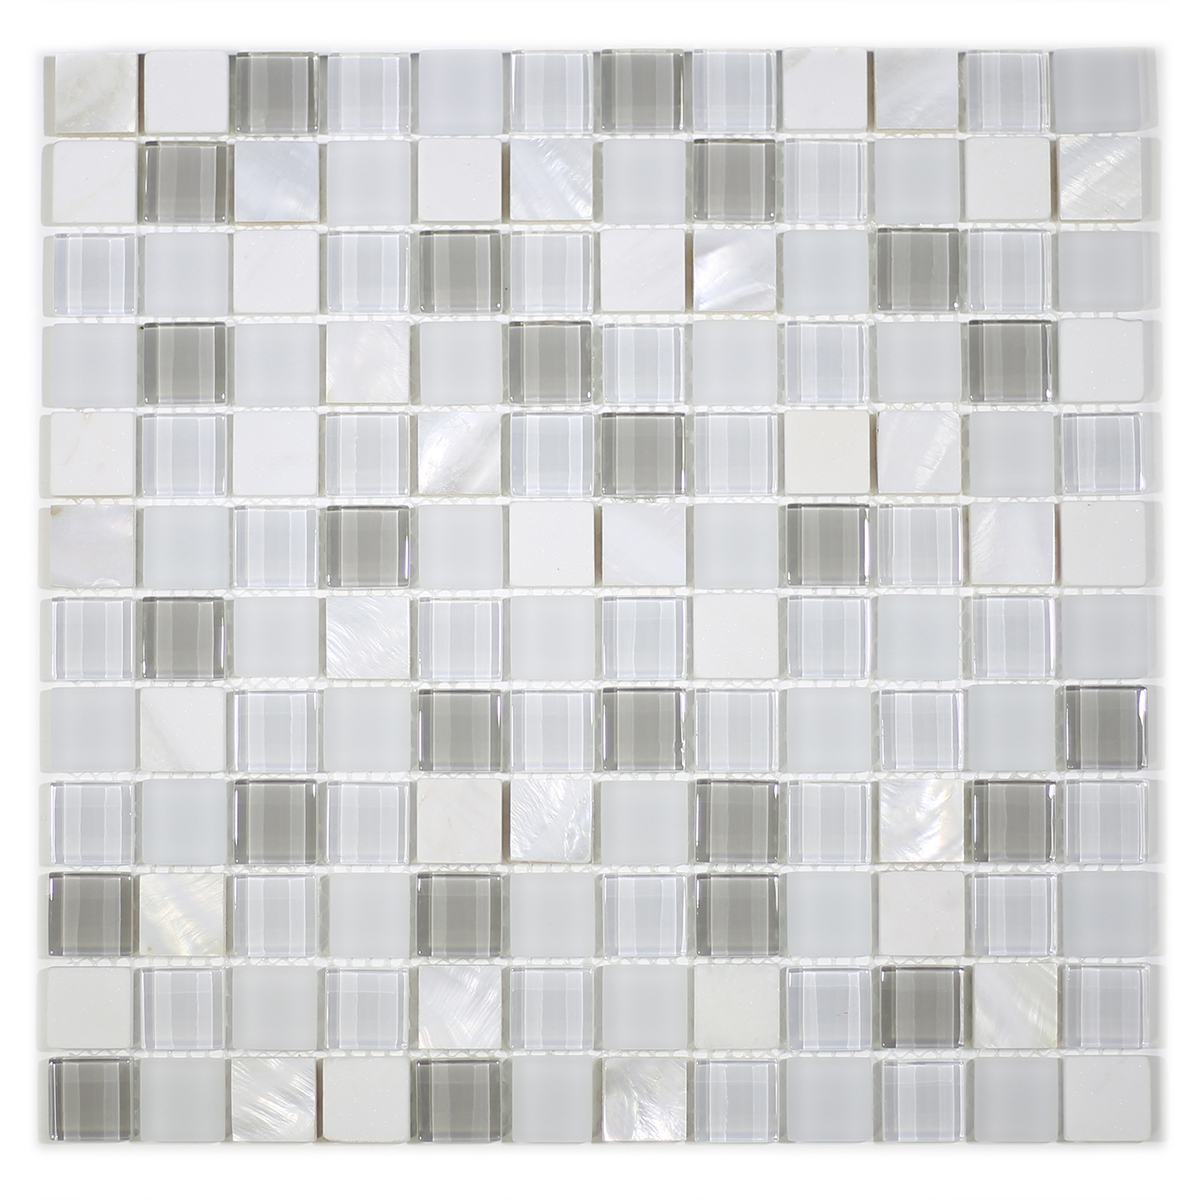 MA68-LS  1" SQUARE SHELL, MARBLE AND GLASS MOSAIC